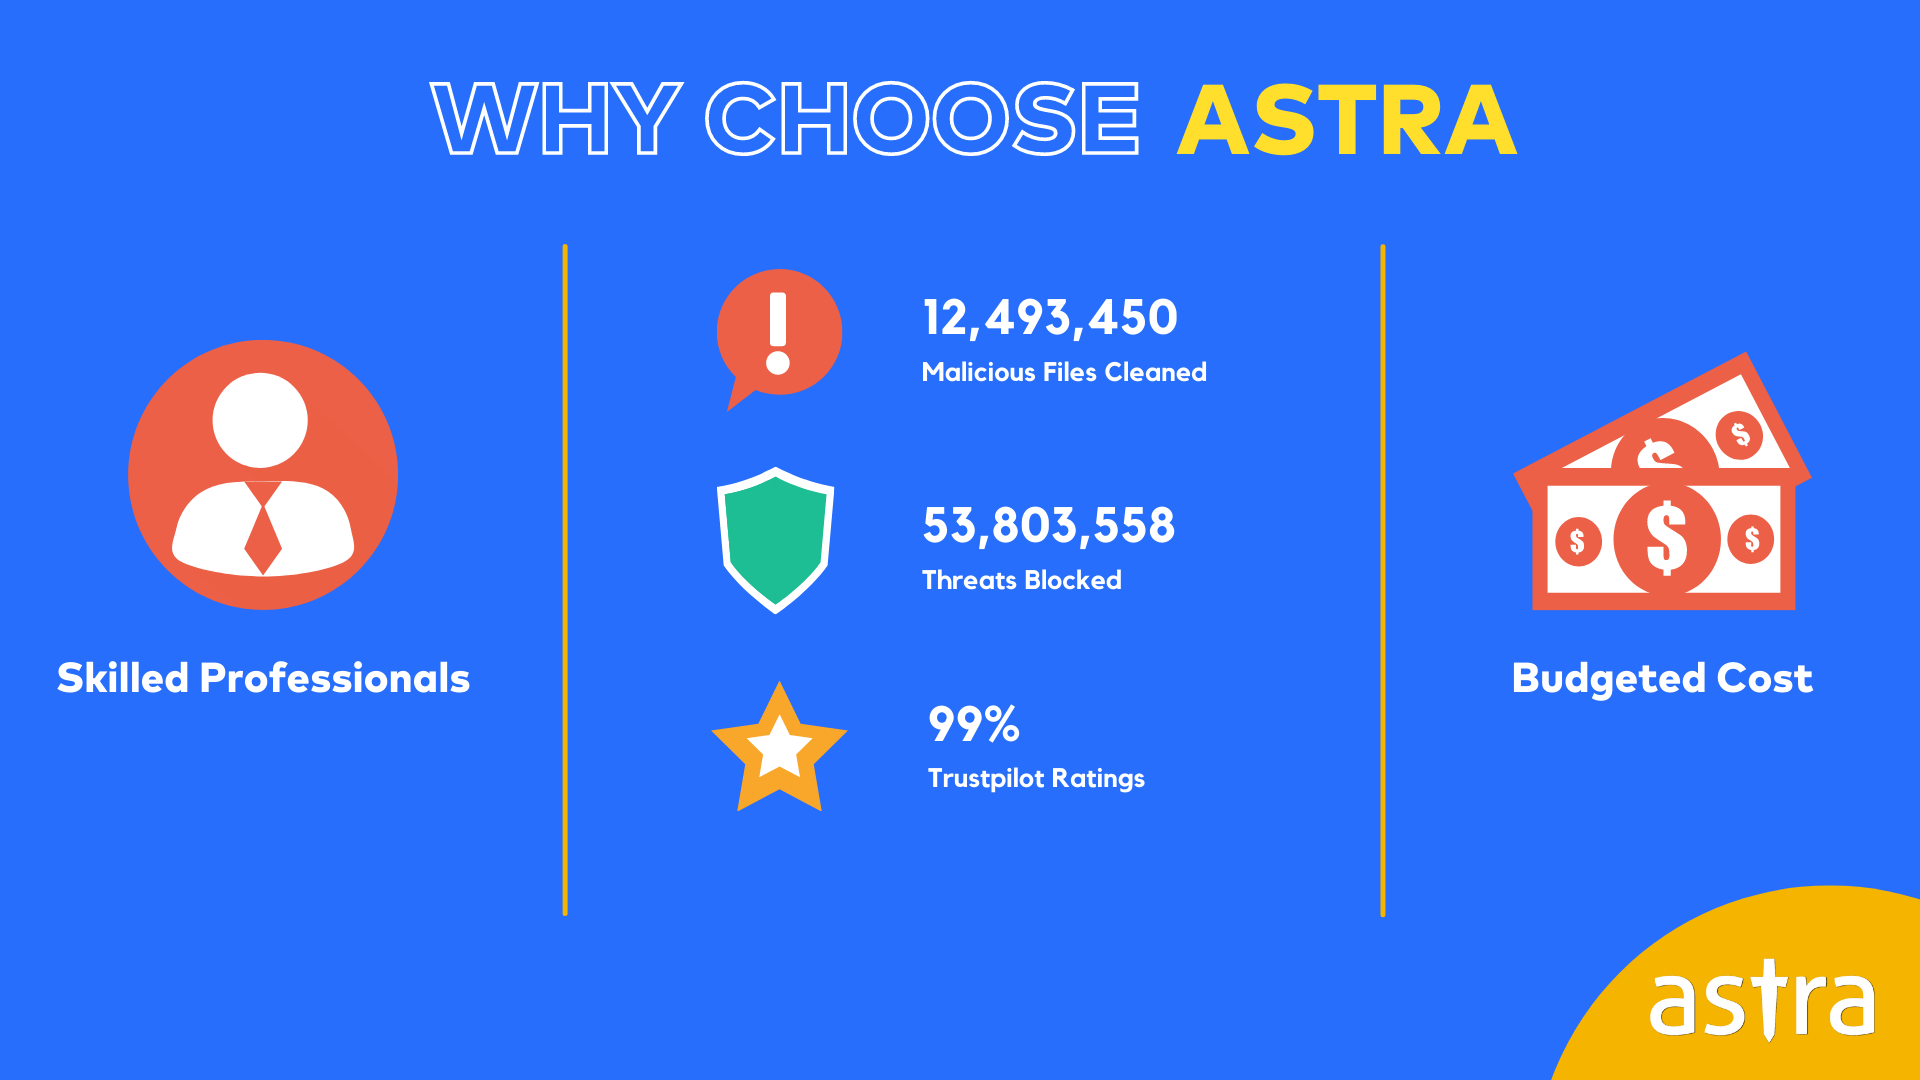 Why trust Astra for Software Security Testing?